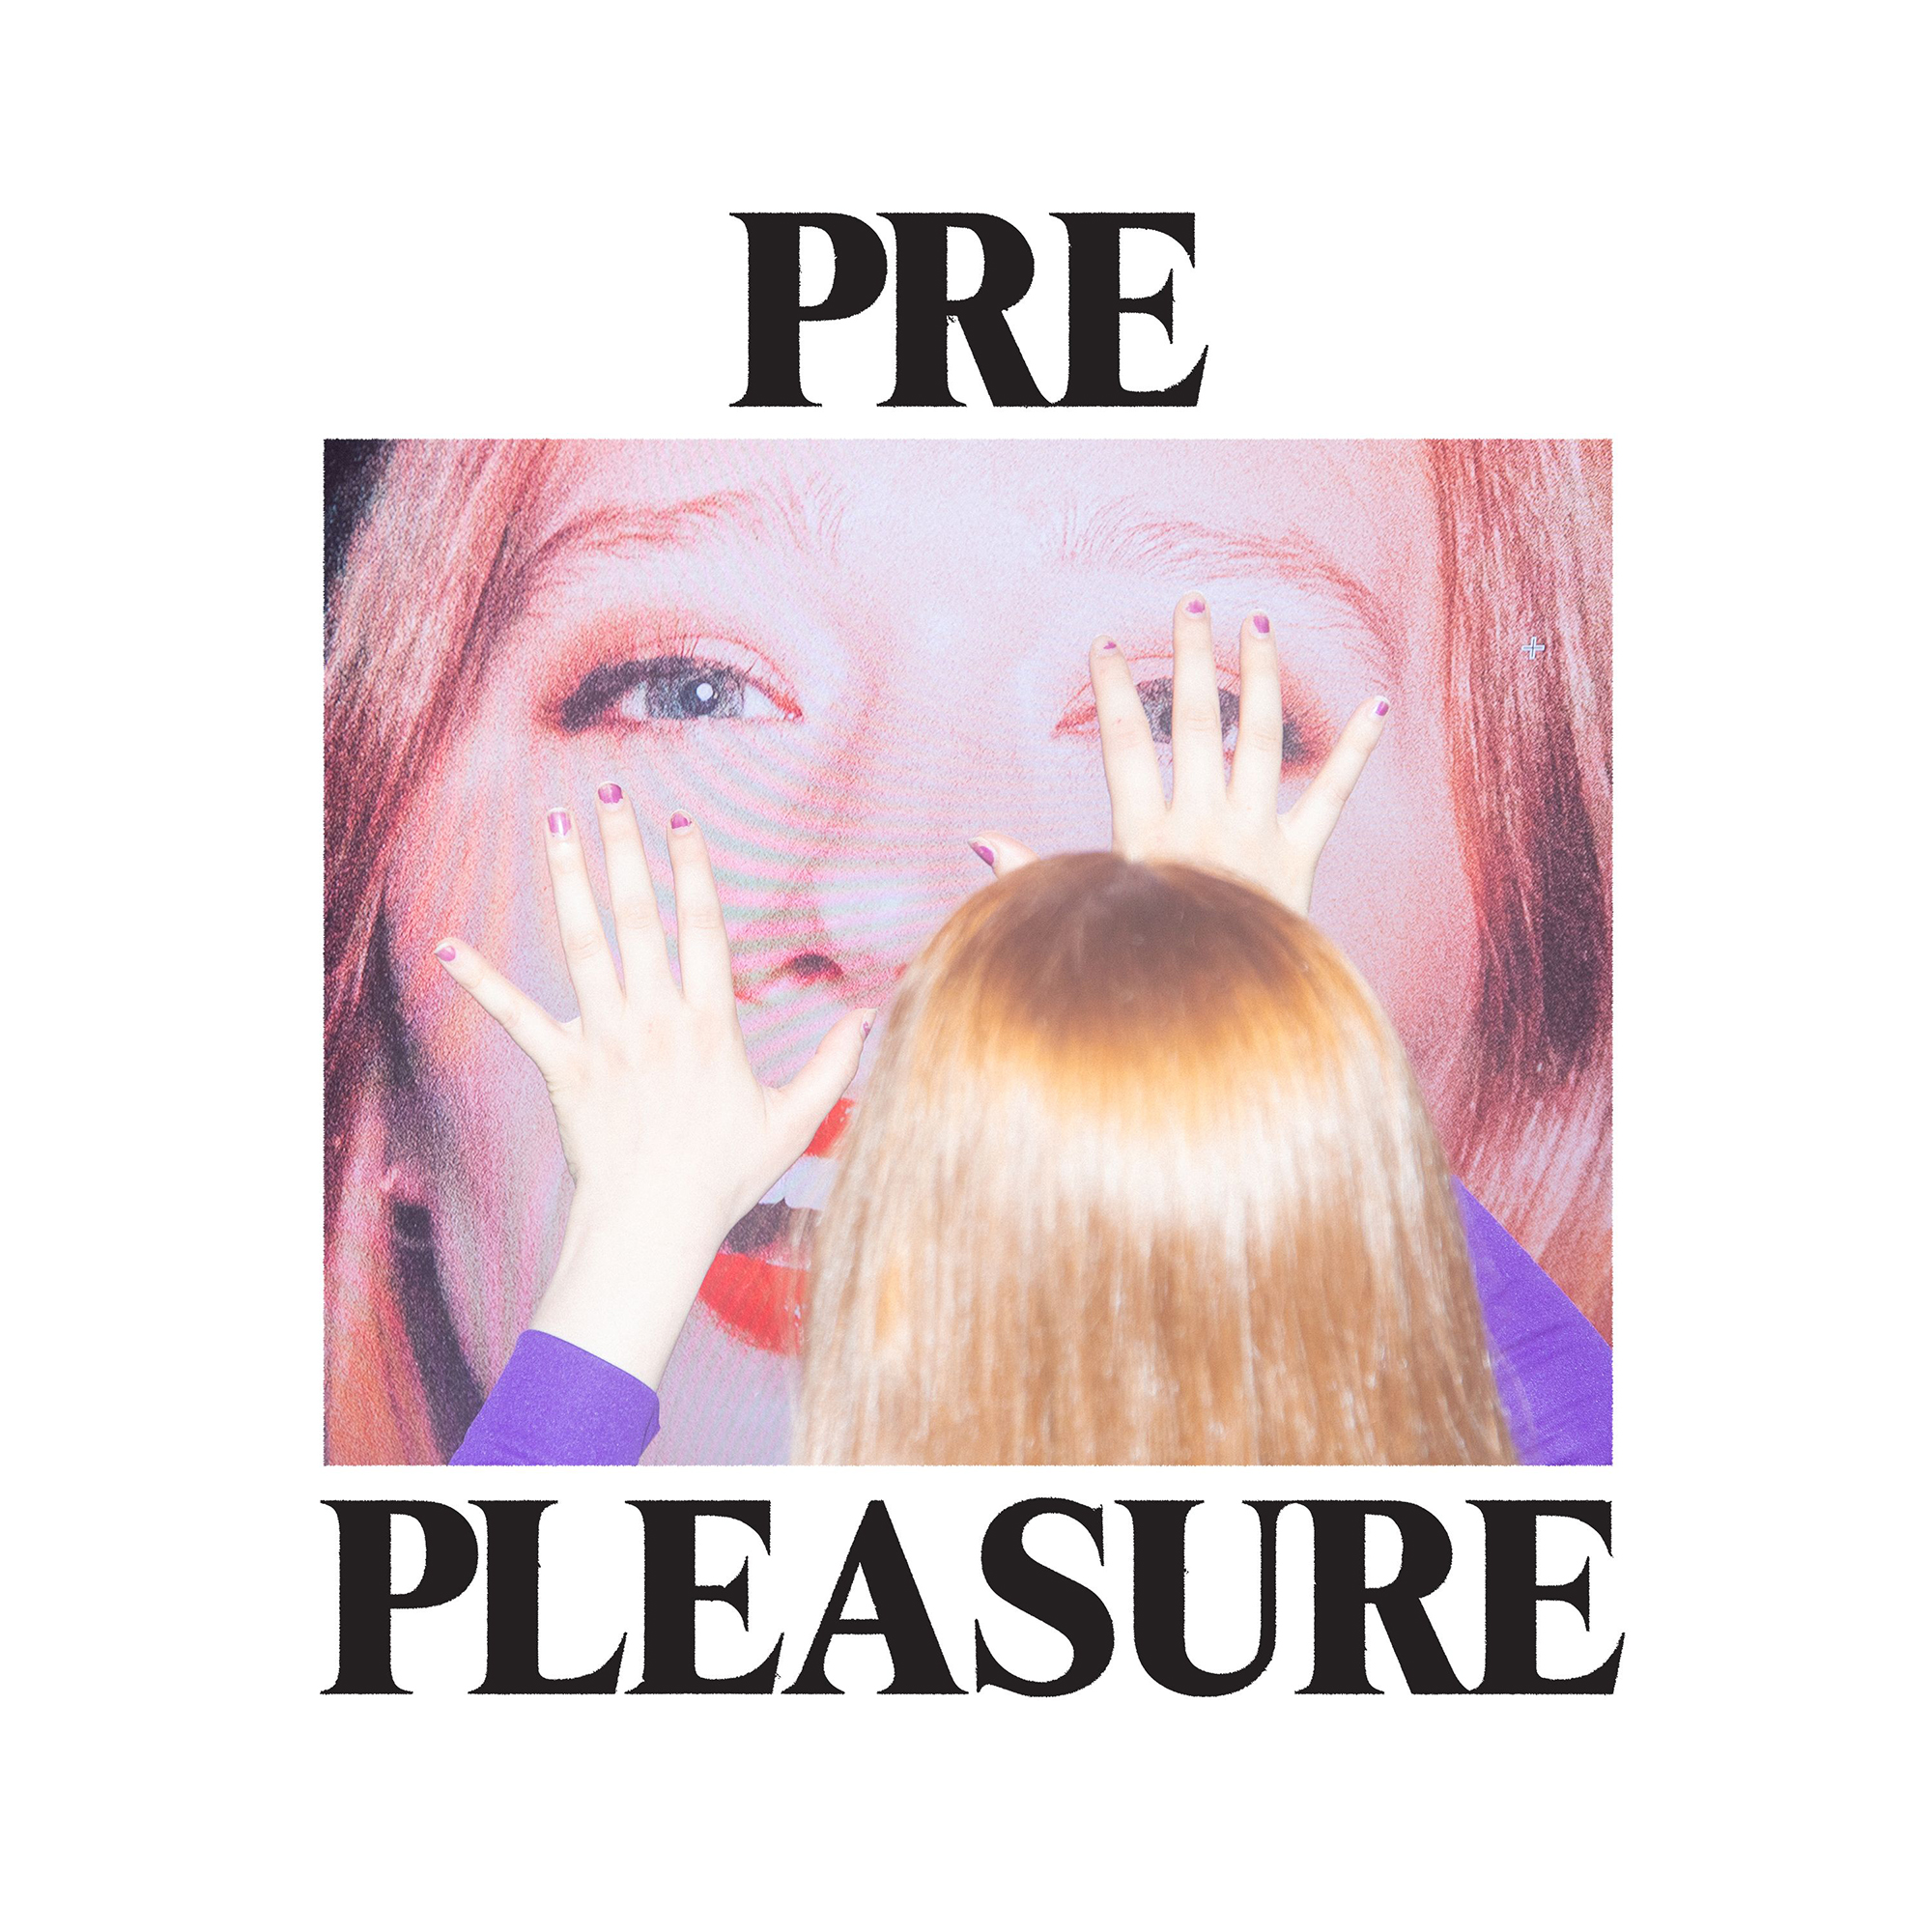 Xxx Of Jaklin - Julia Jacklin - New album PRE PLEASURE out August 26, 2022. Pre-order now  and stream the first single, \